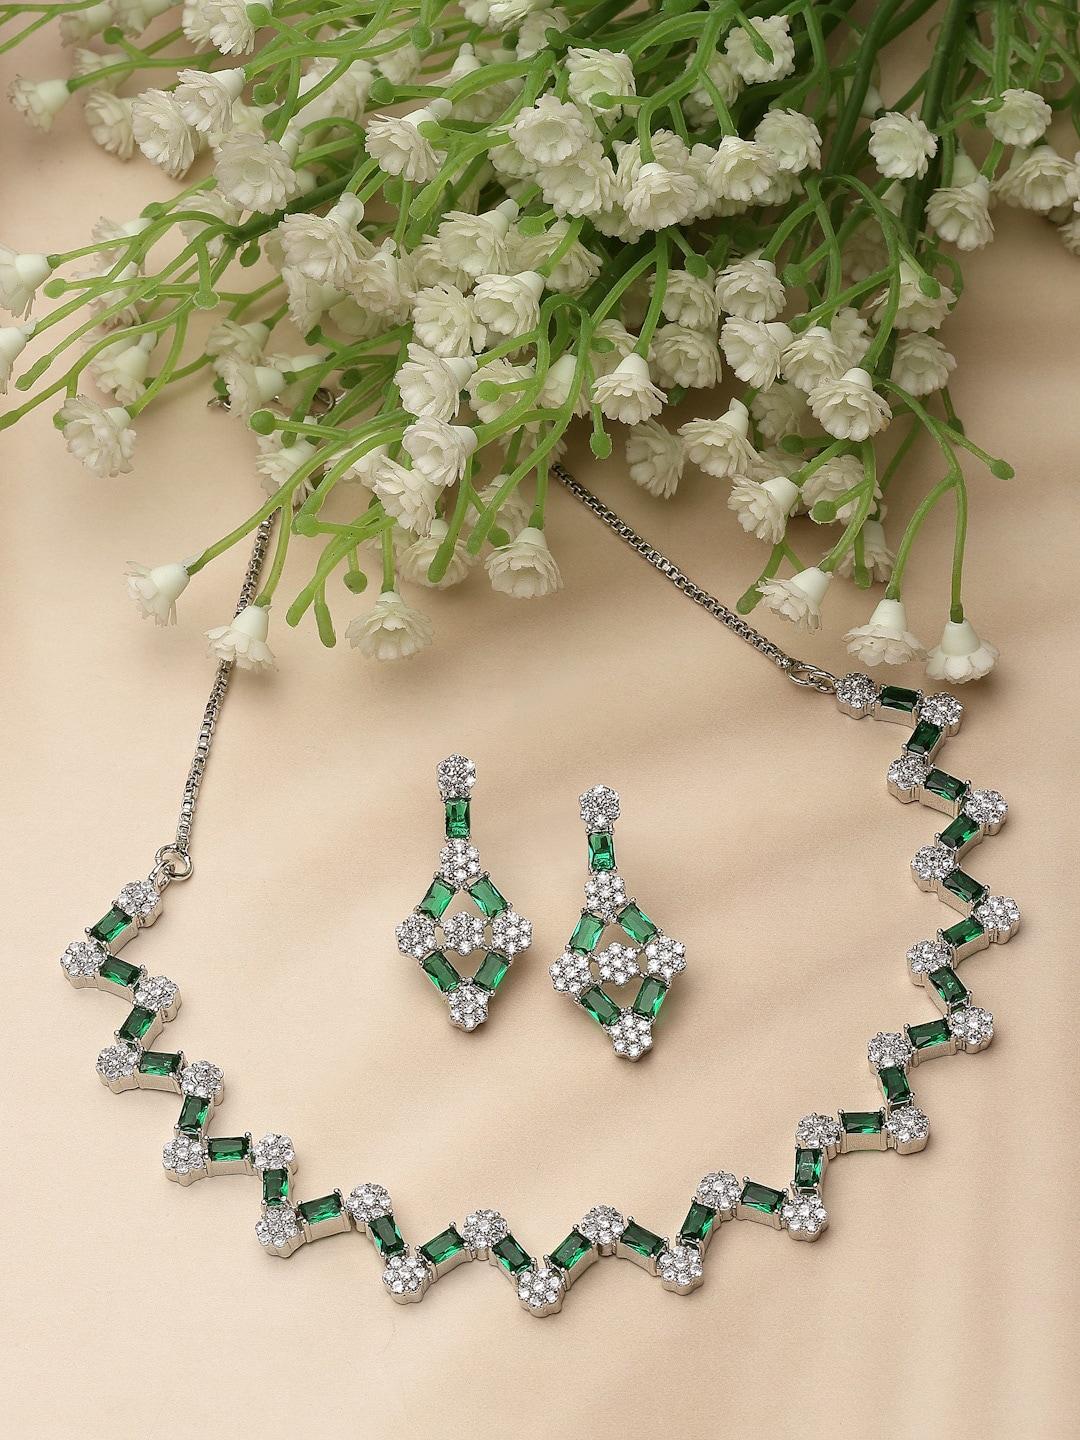 zeneme rhodium-plated ad-studded necklace and earrings